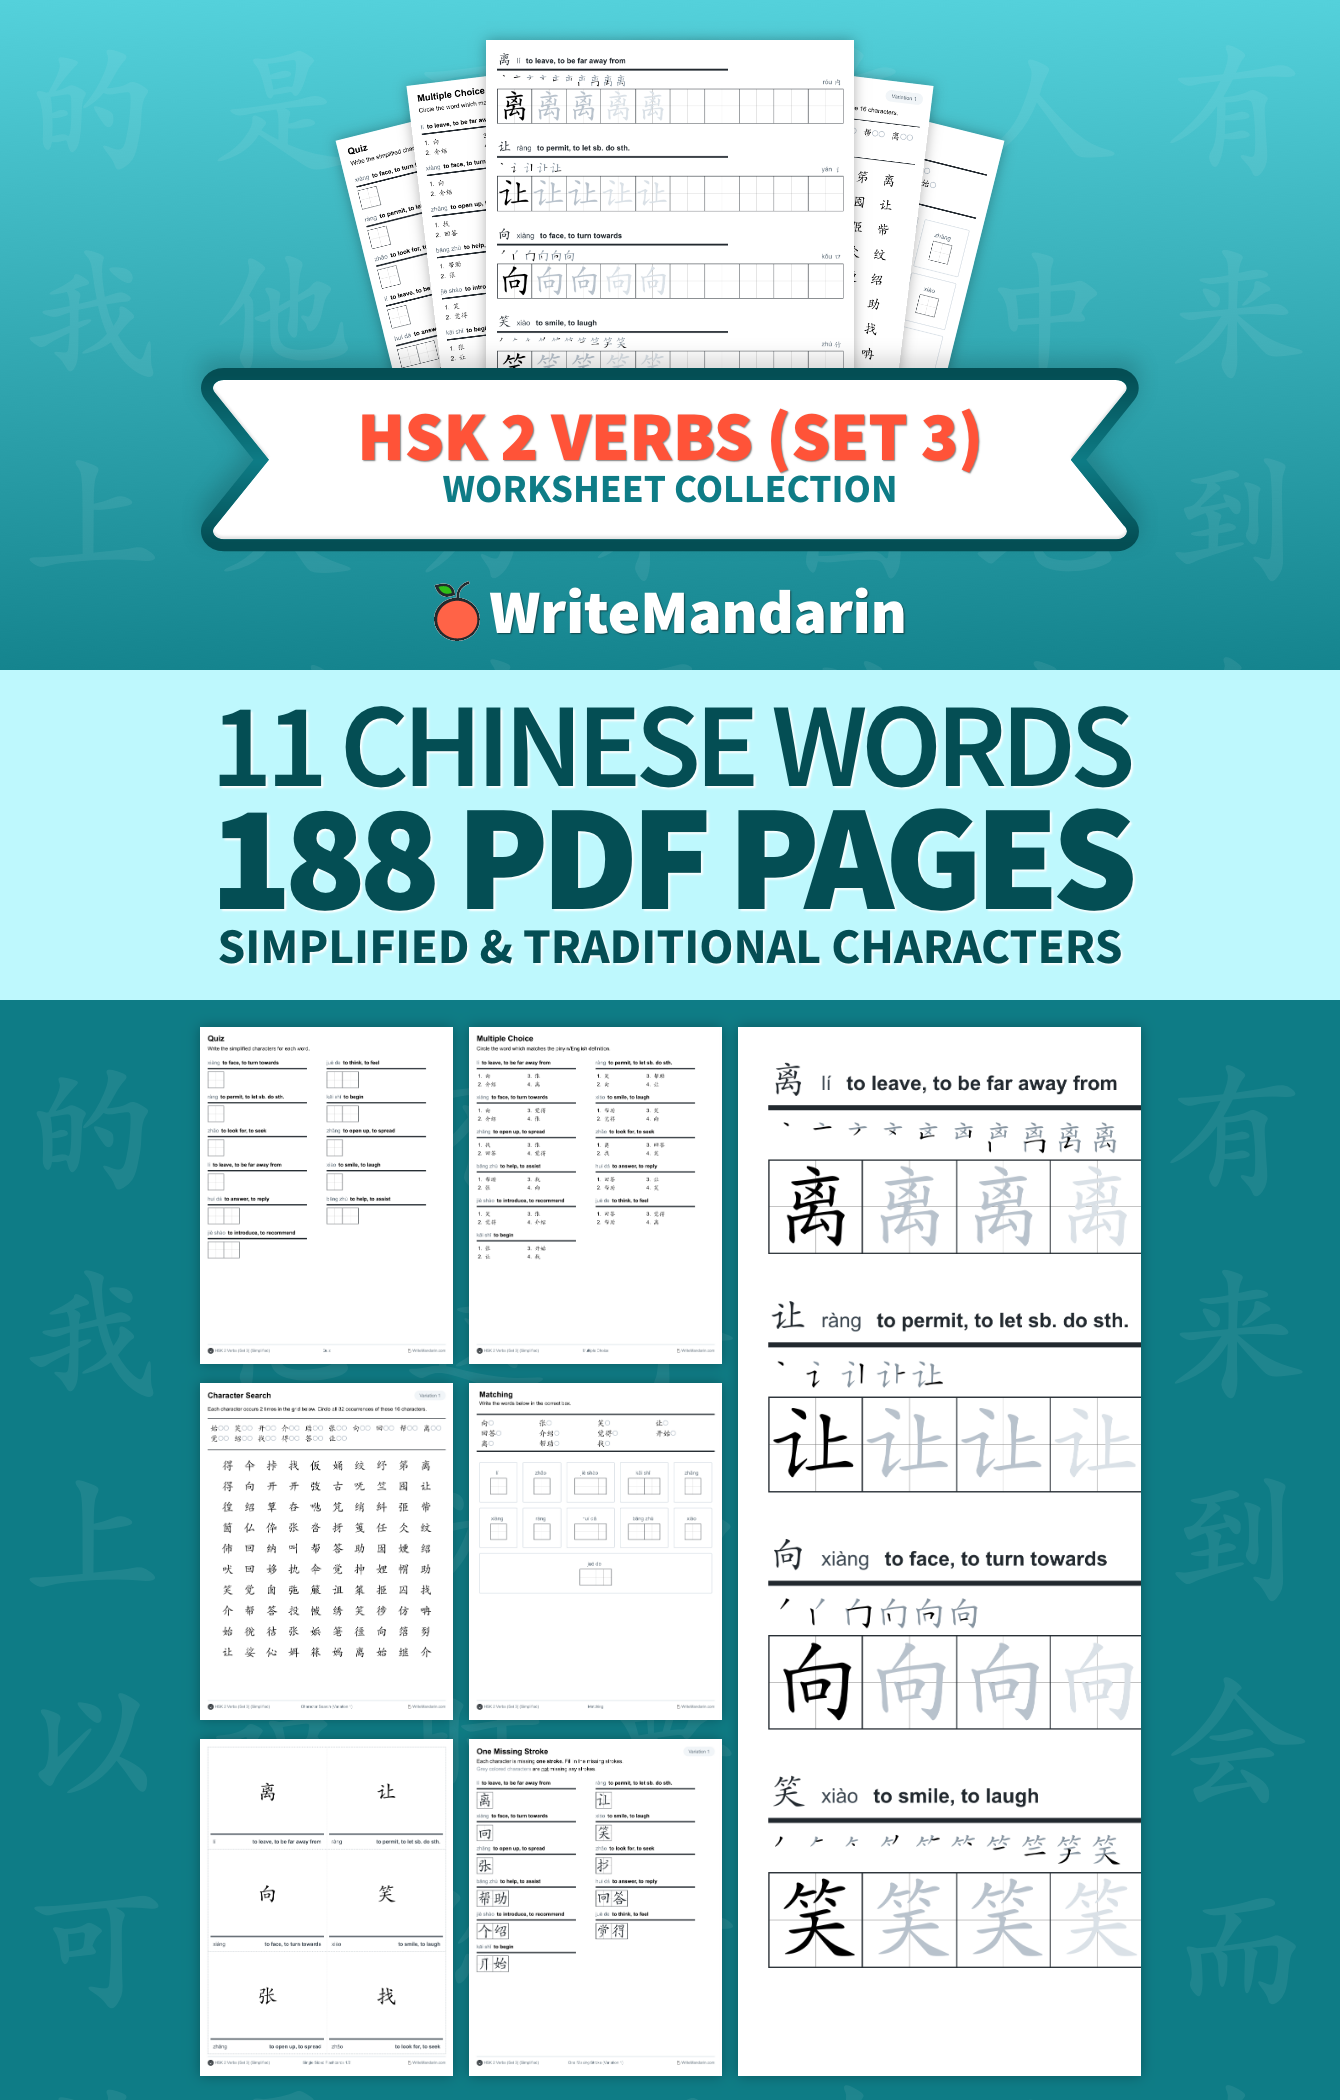 Preview image of HSK 2 Verbs (Set 3) worksheet collection